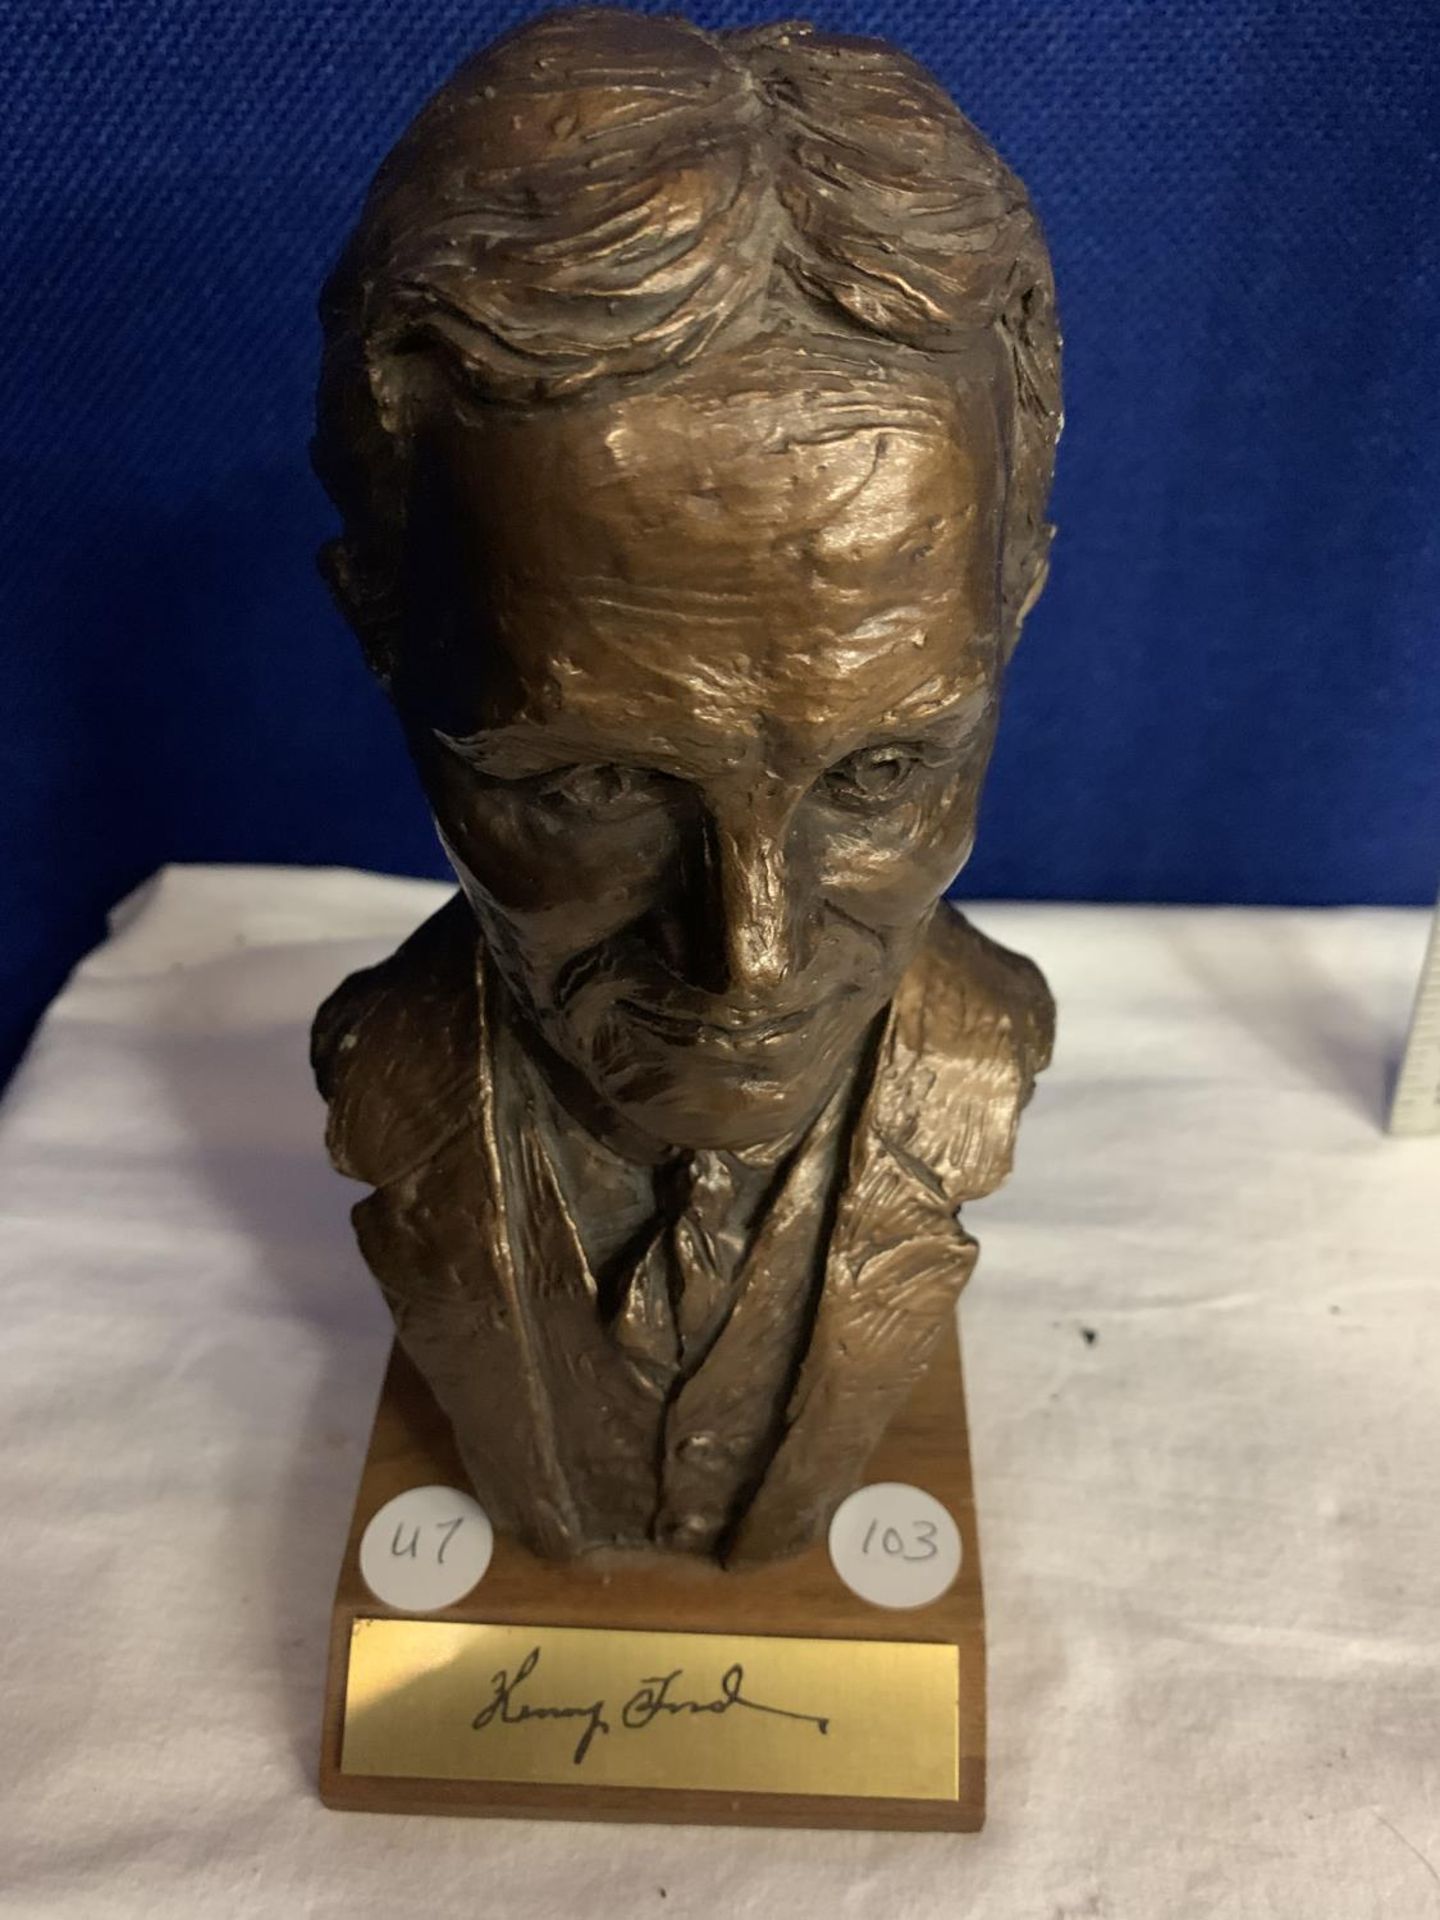 A SMALL RESIN BUST OF HENRY FORD